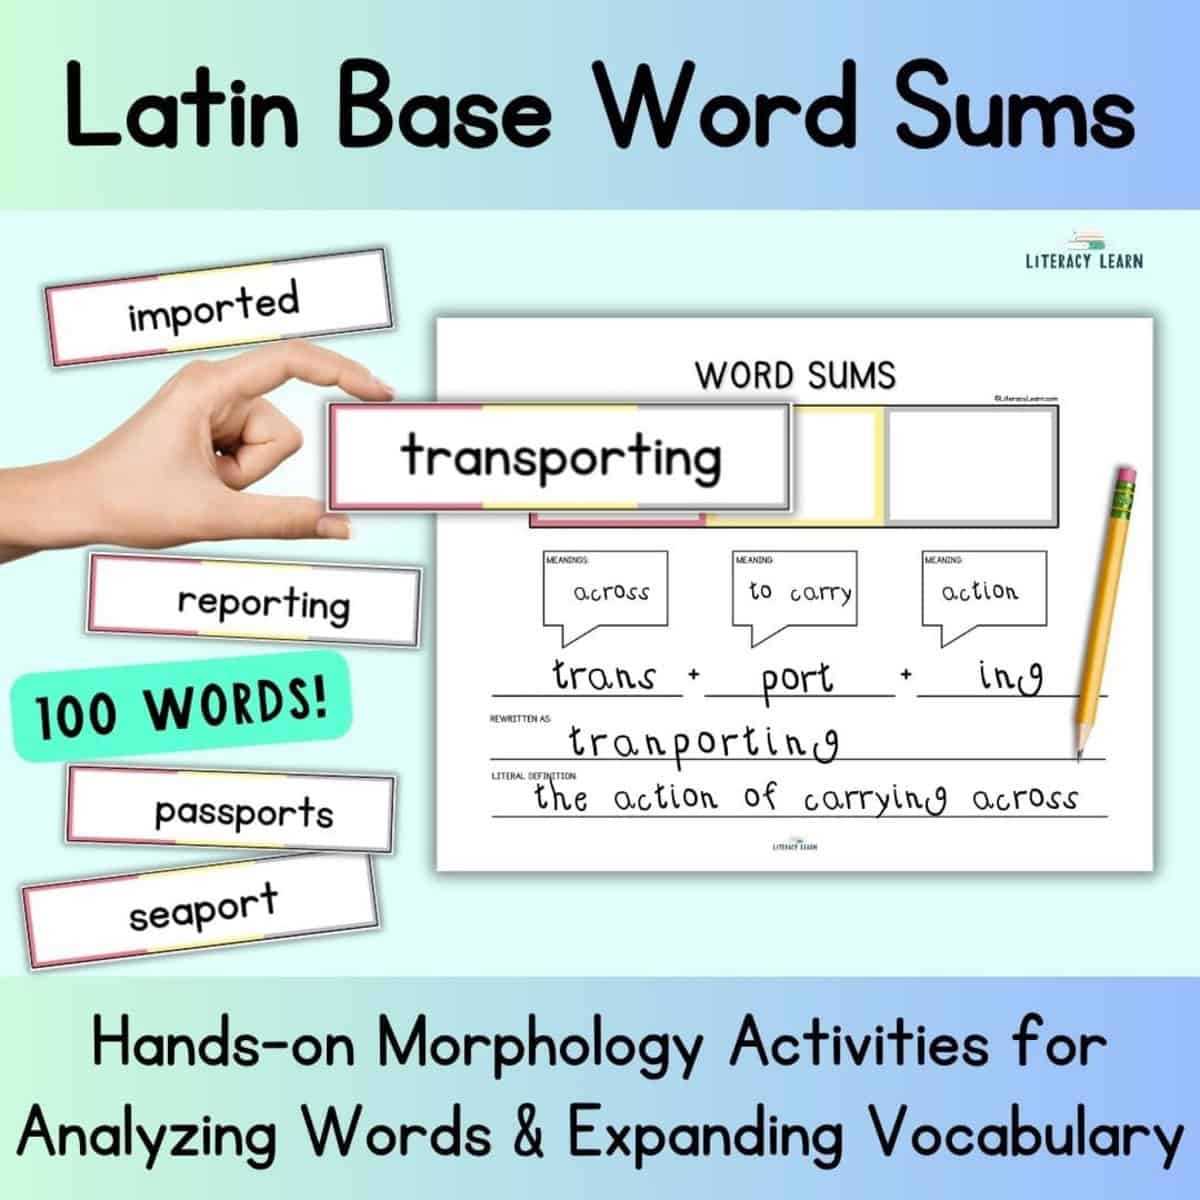 Blue graphic entitled "Latin Base Word Sums" showing word sum template and word cards.